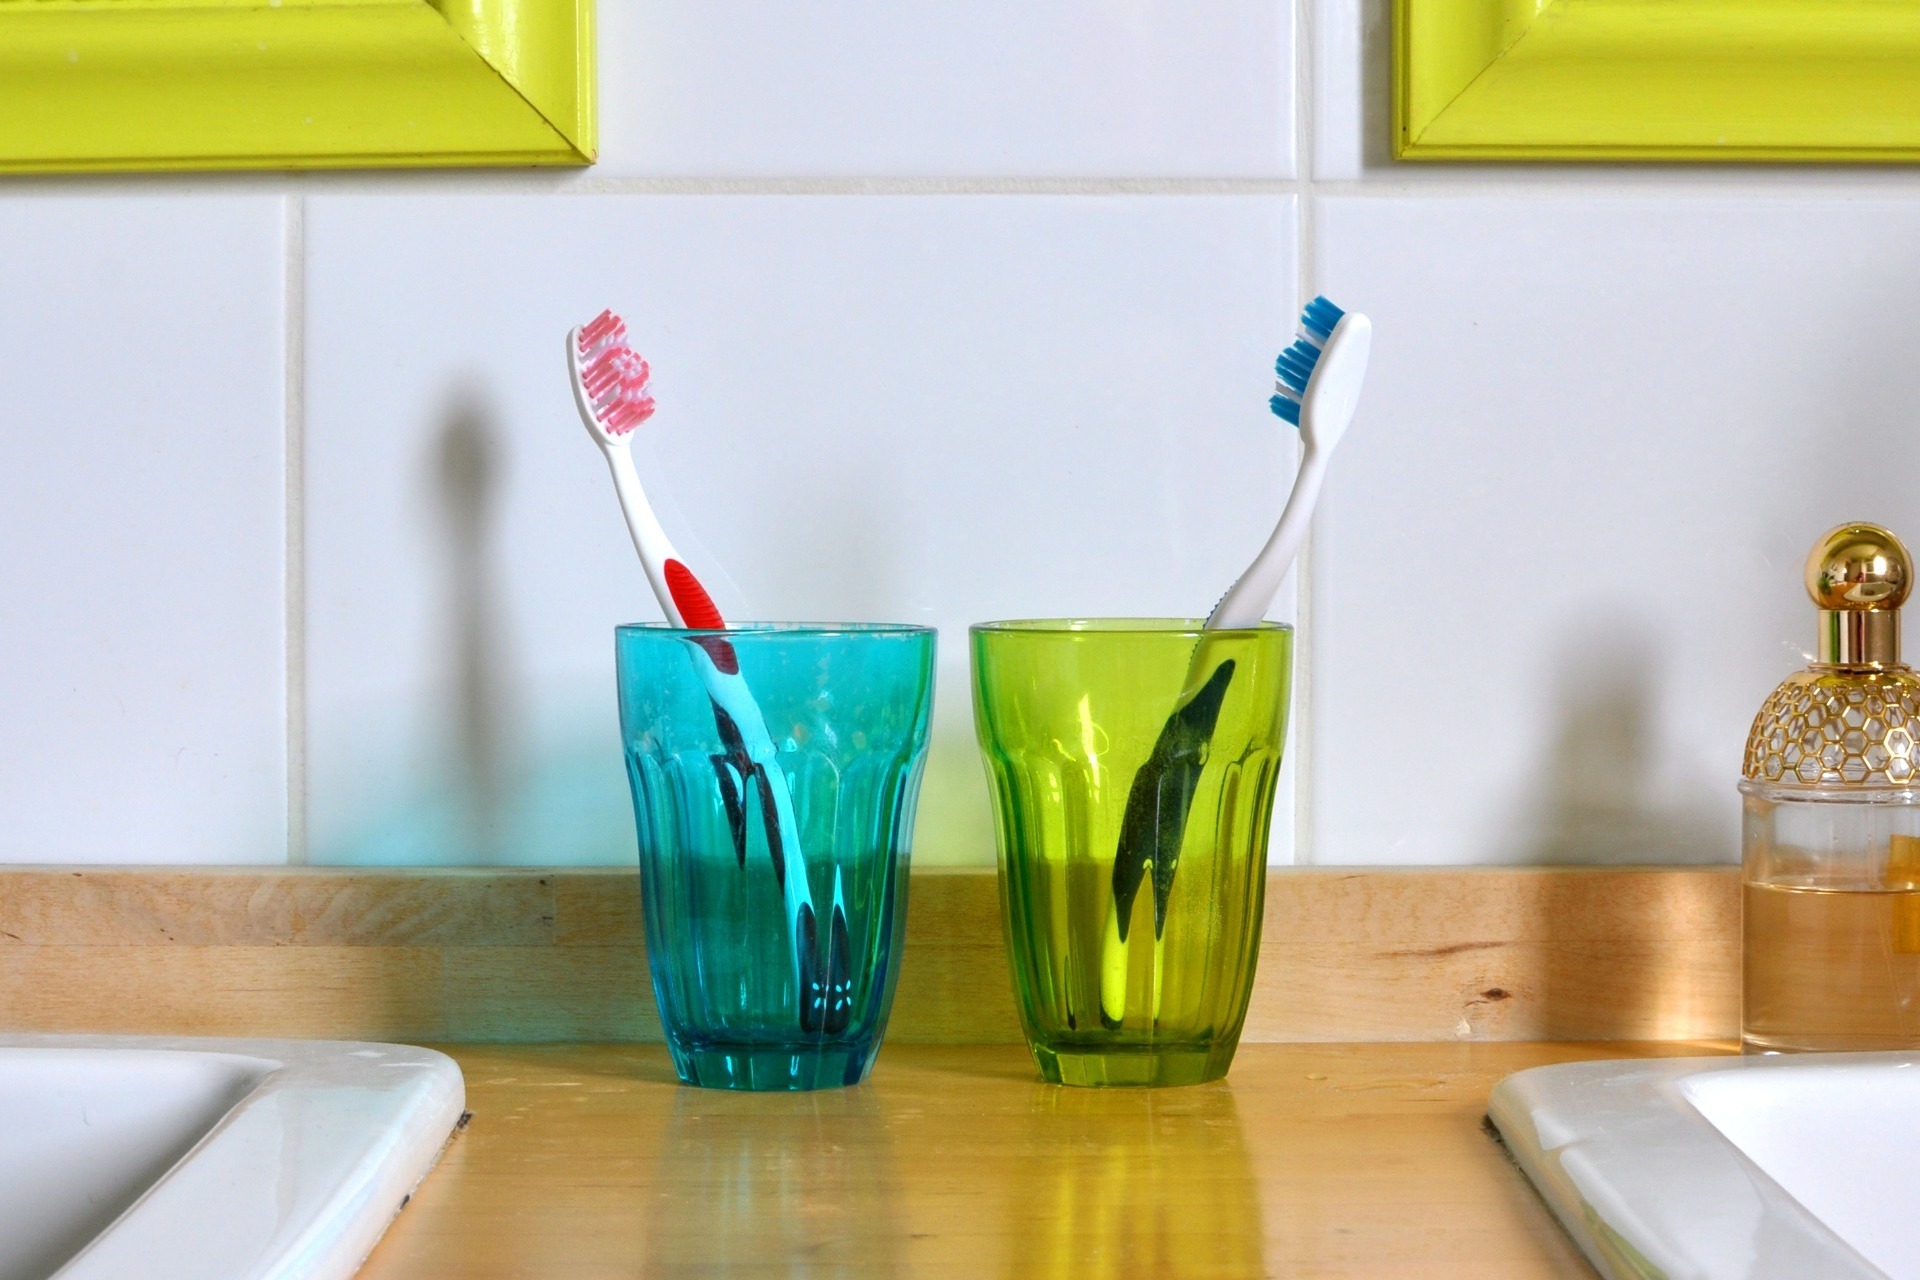 A pair of toothbrushes.